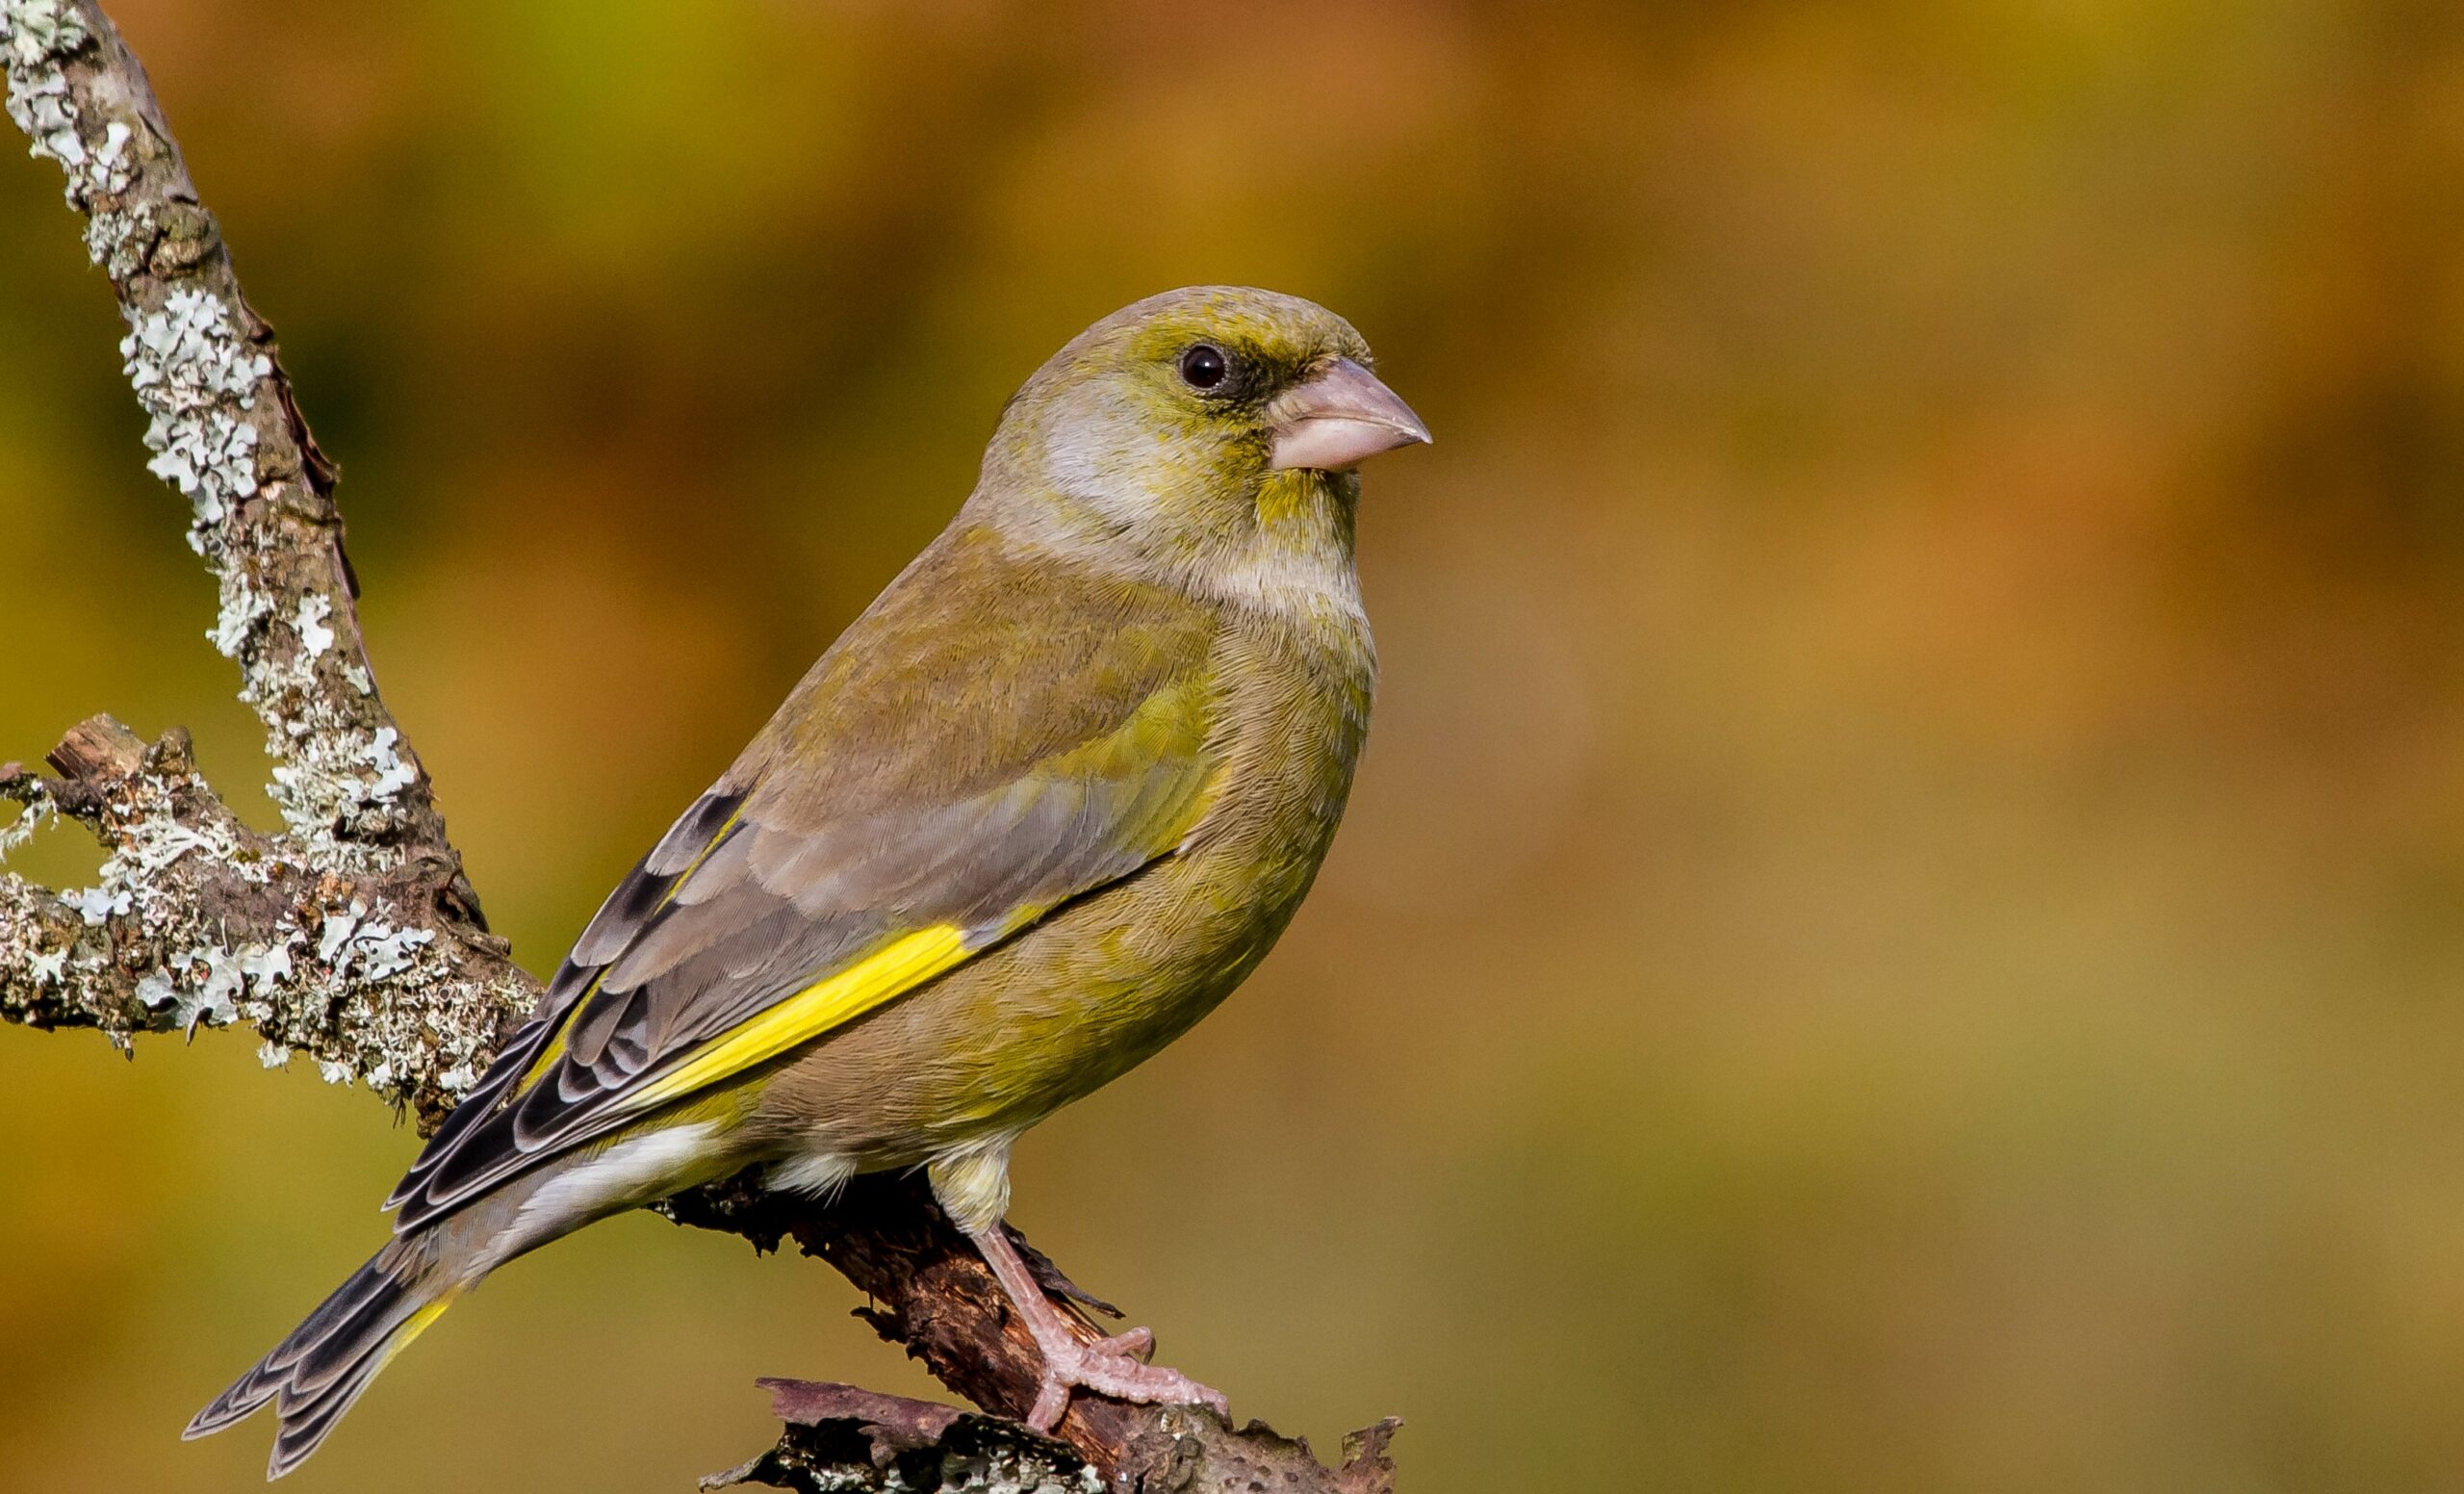 Greenfinch on a tree branch